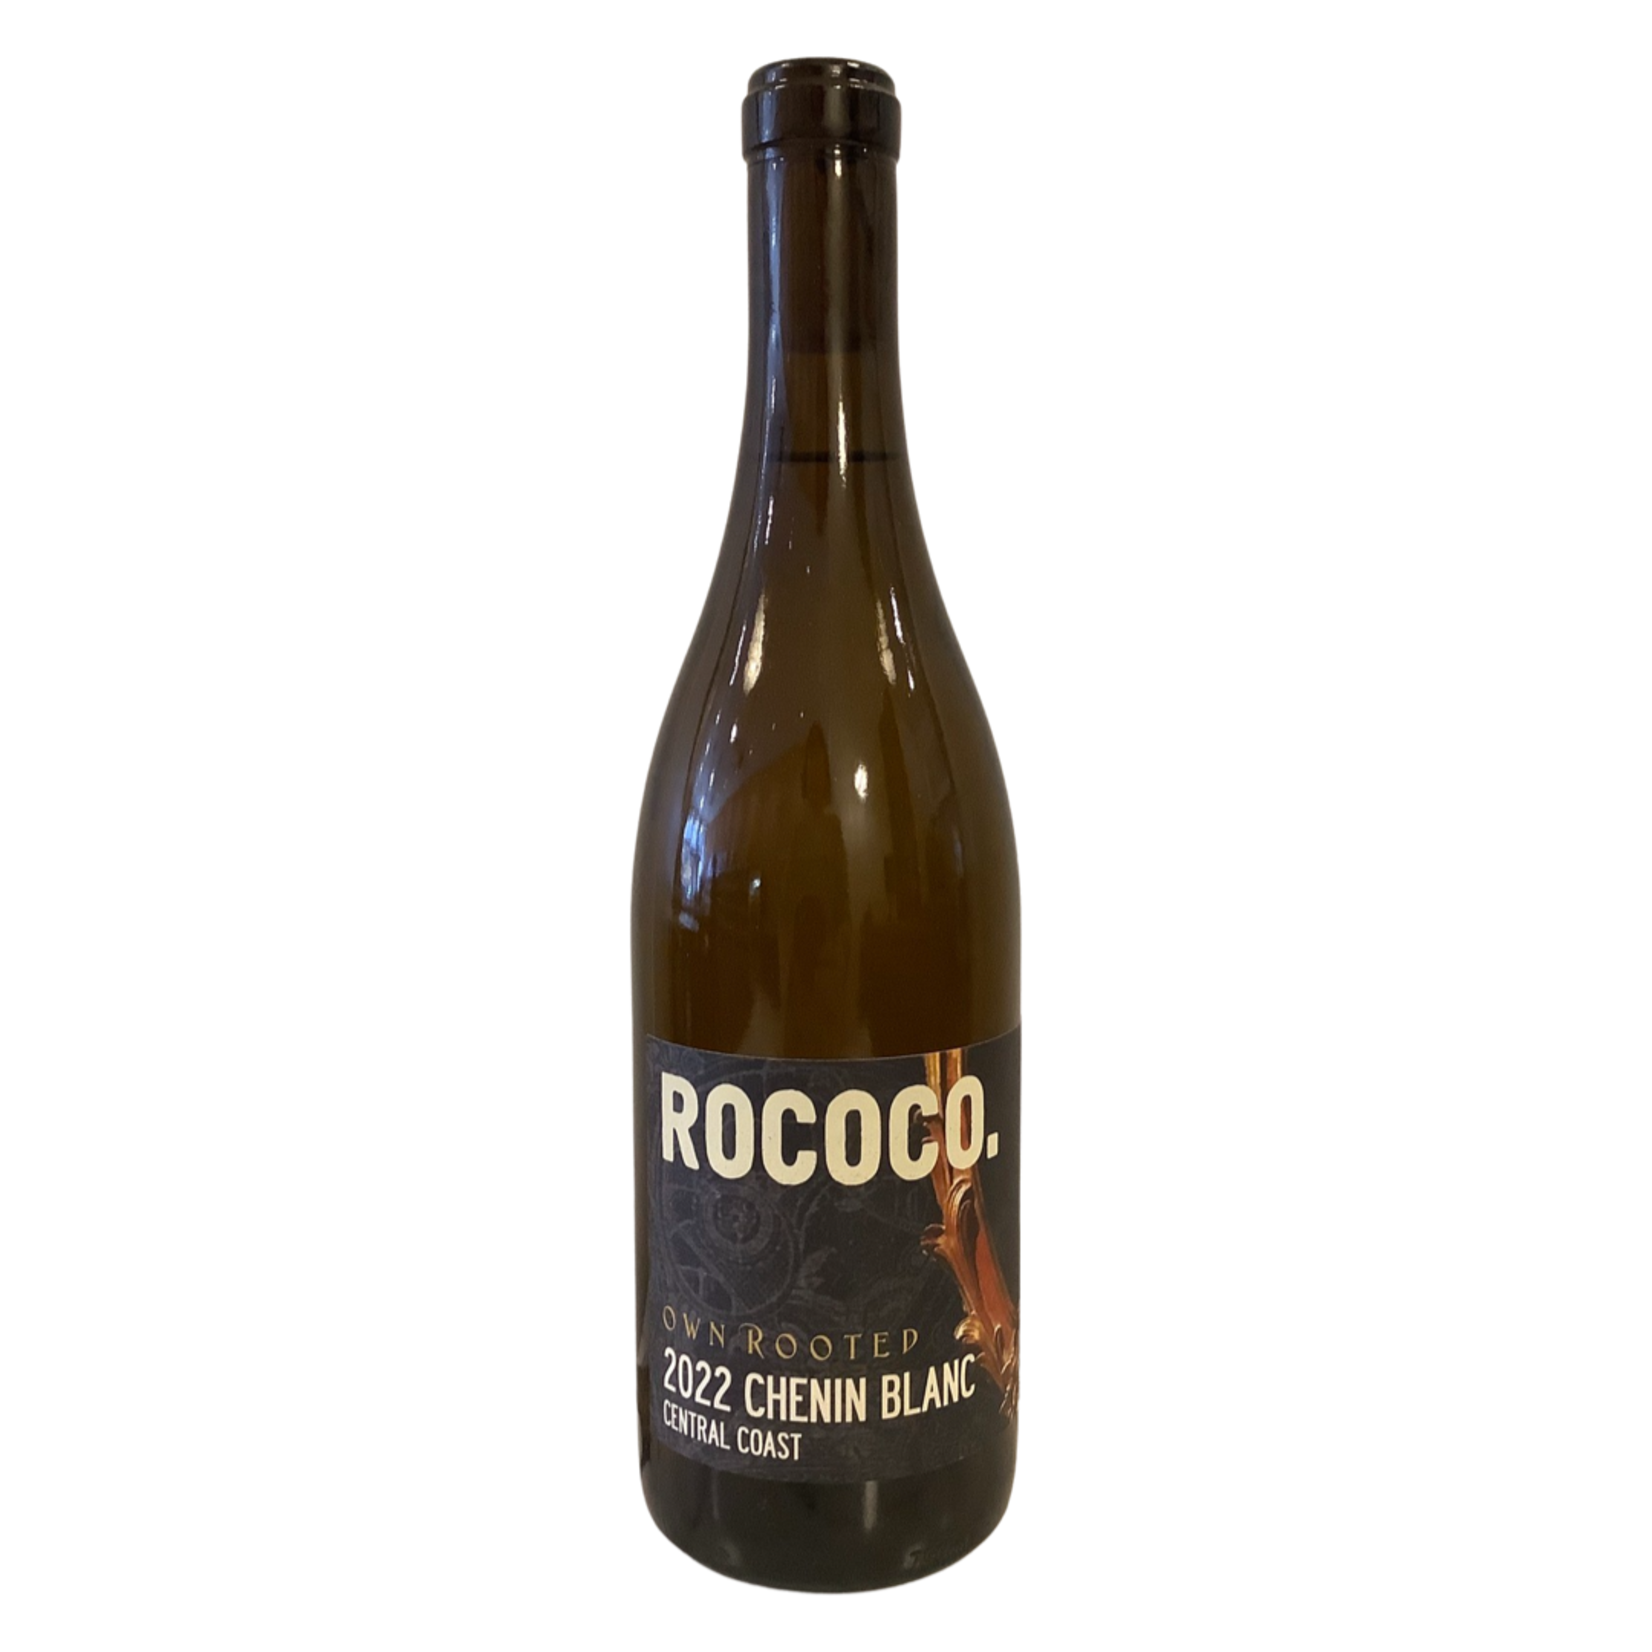 2022 Rococo "Own Rooted" Chenin Blanc, Central Coast CA